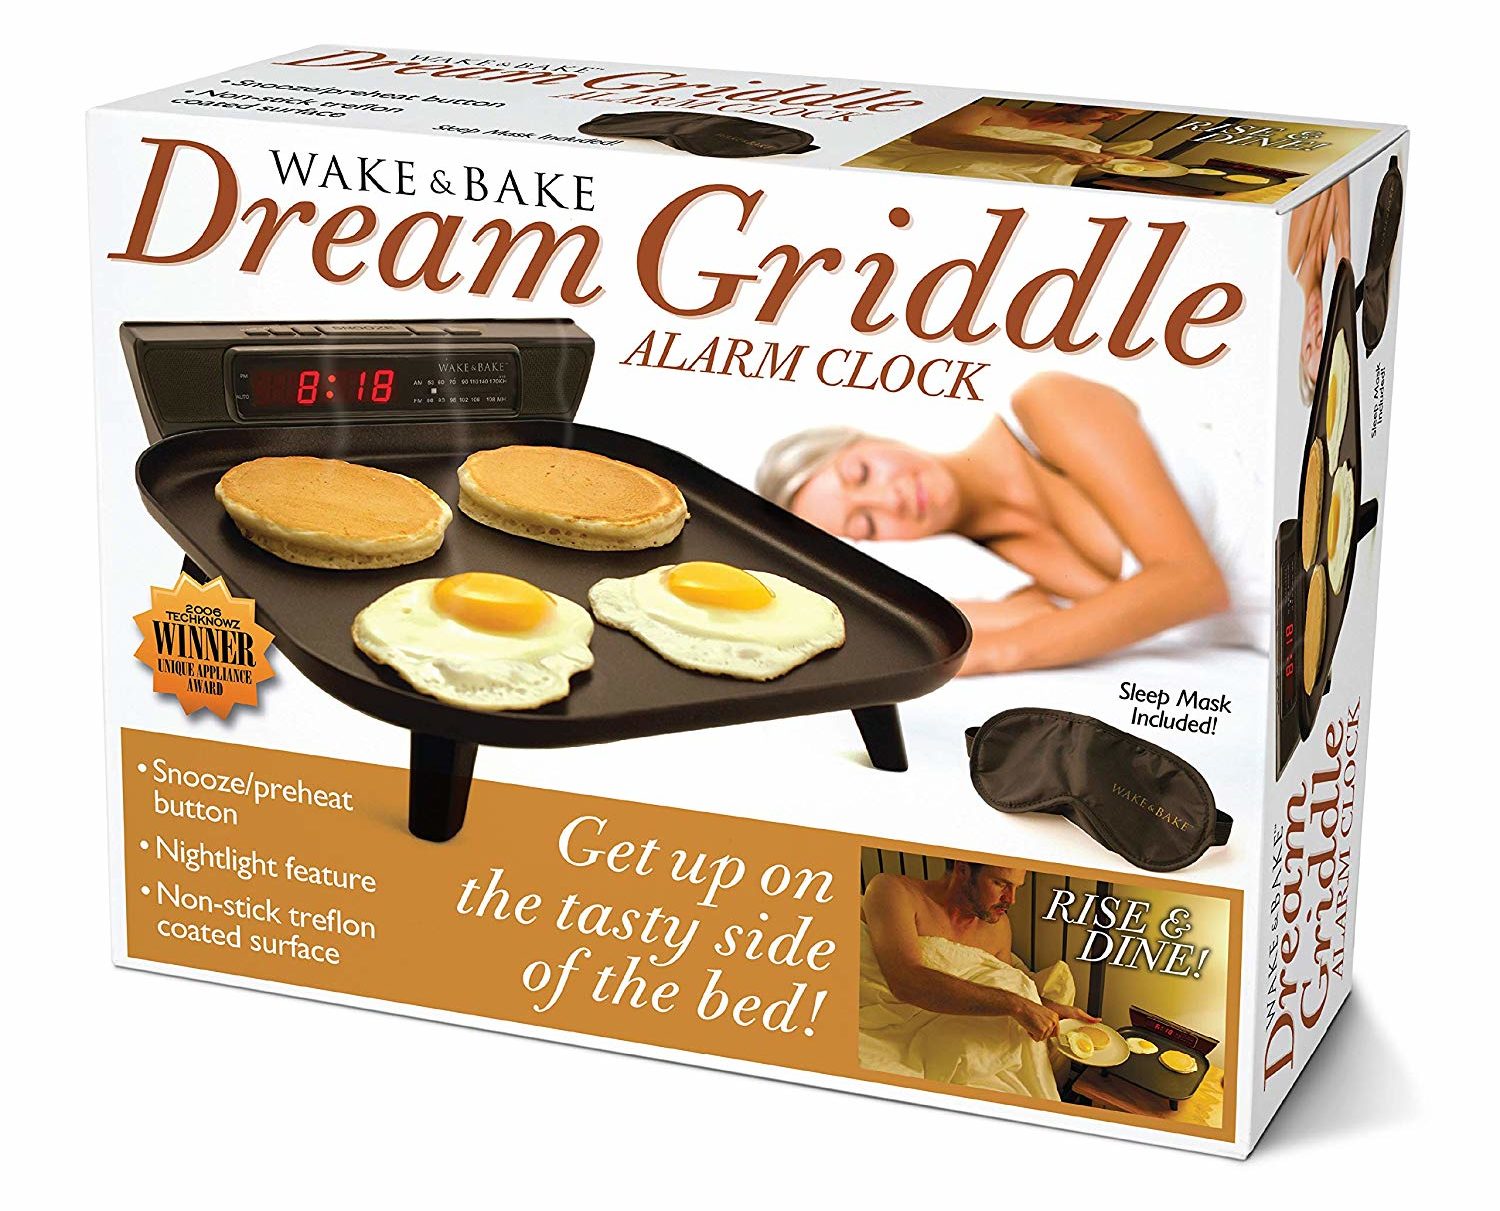 Best Coworker Gifts 2022: Funny Dream Griddle Alarm Clock Prank for Boss 2022